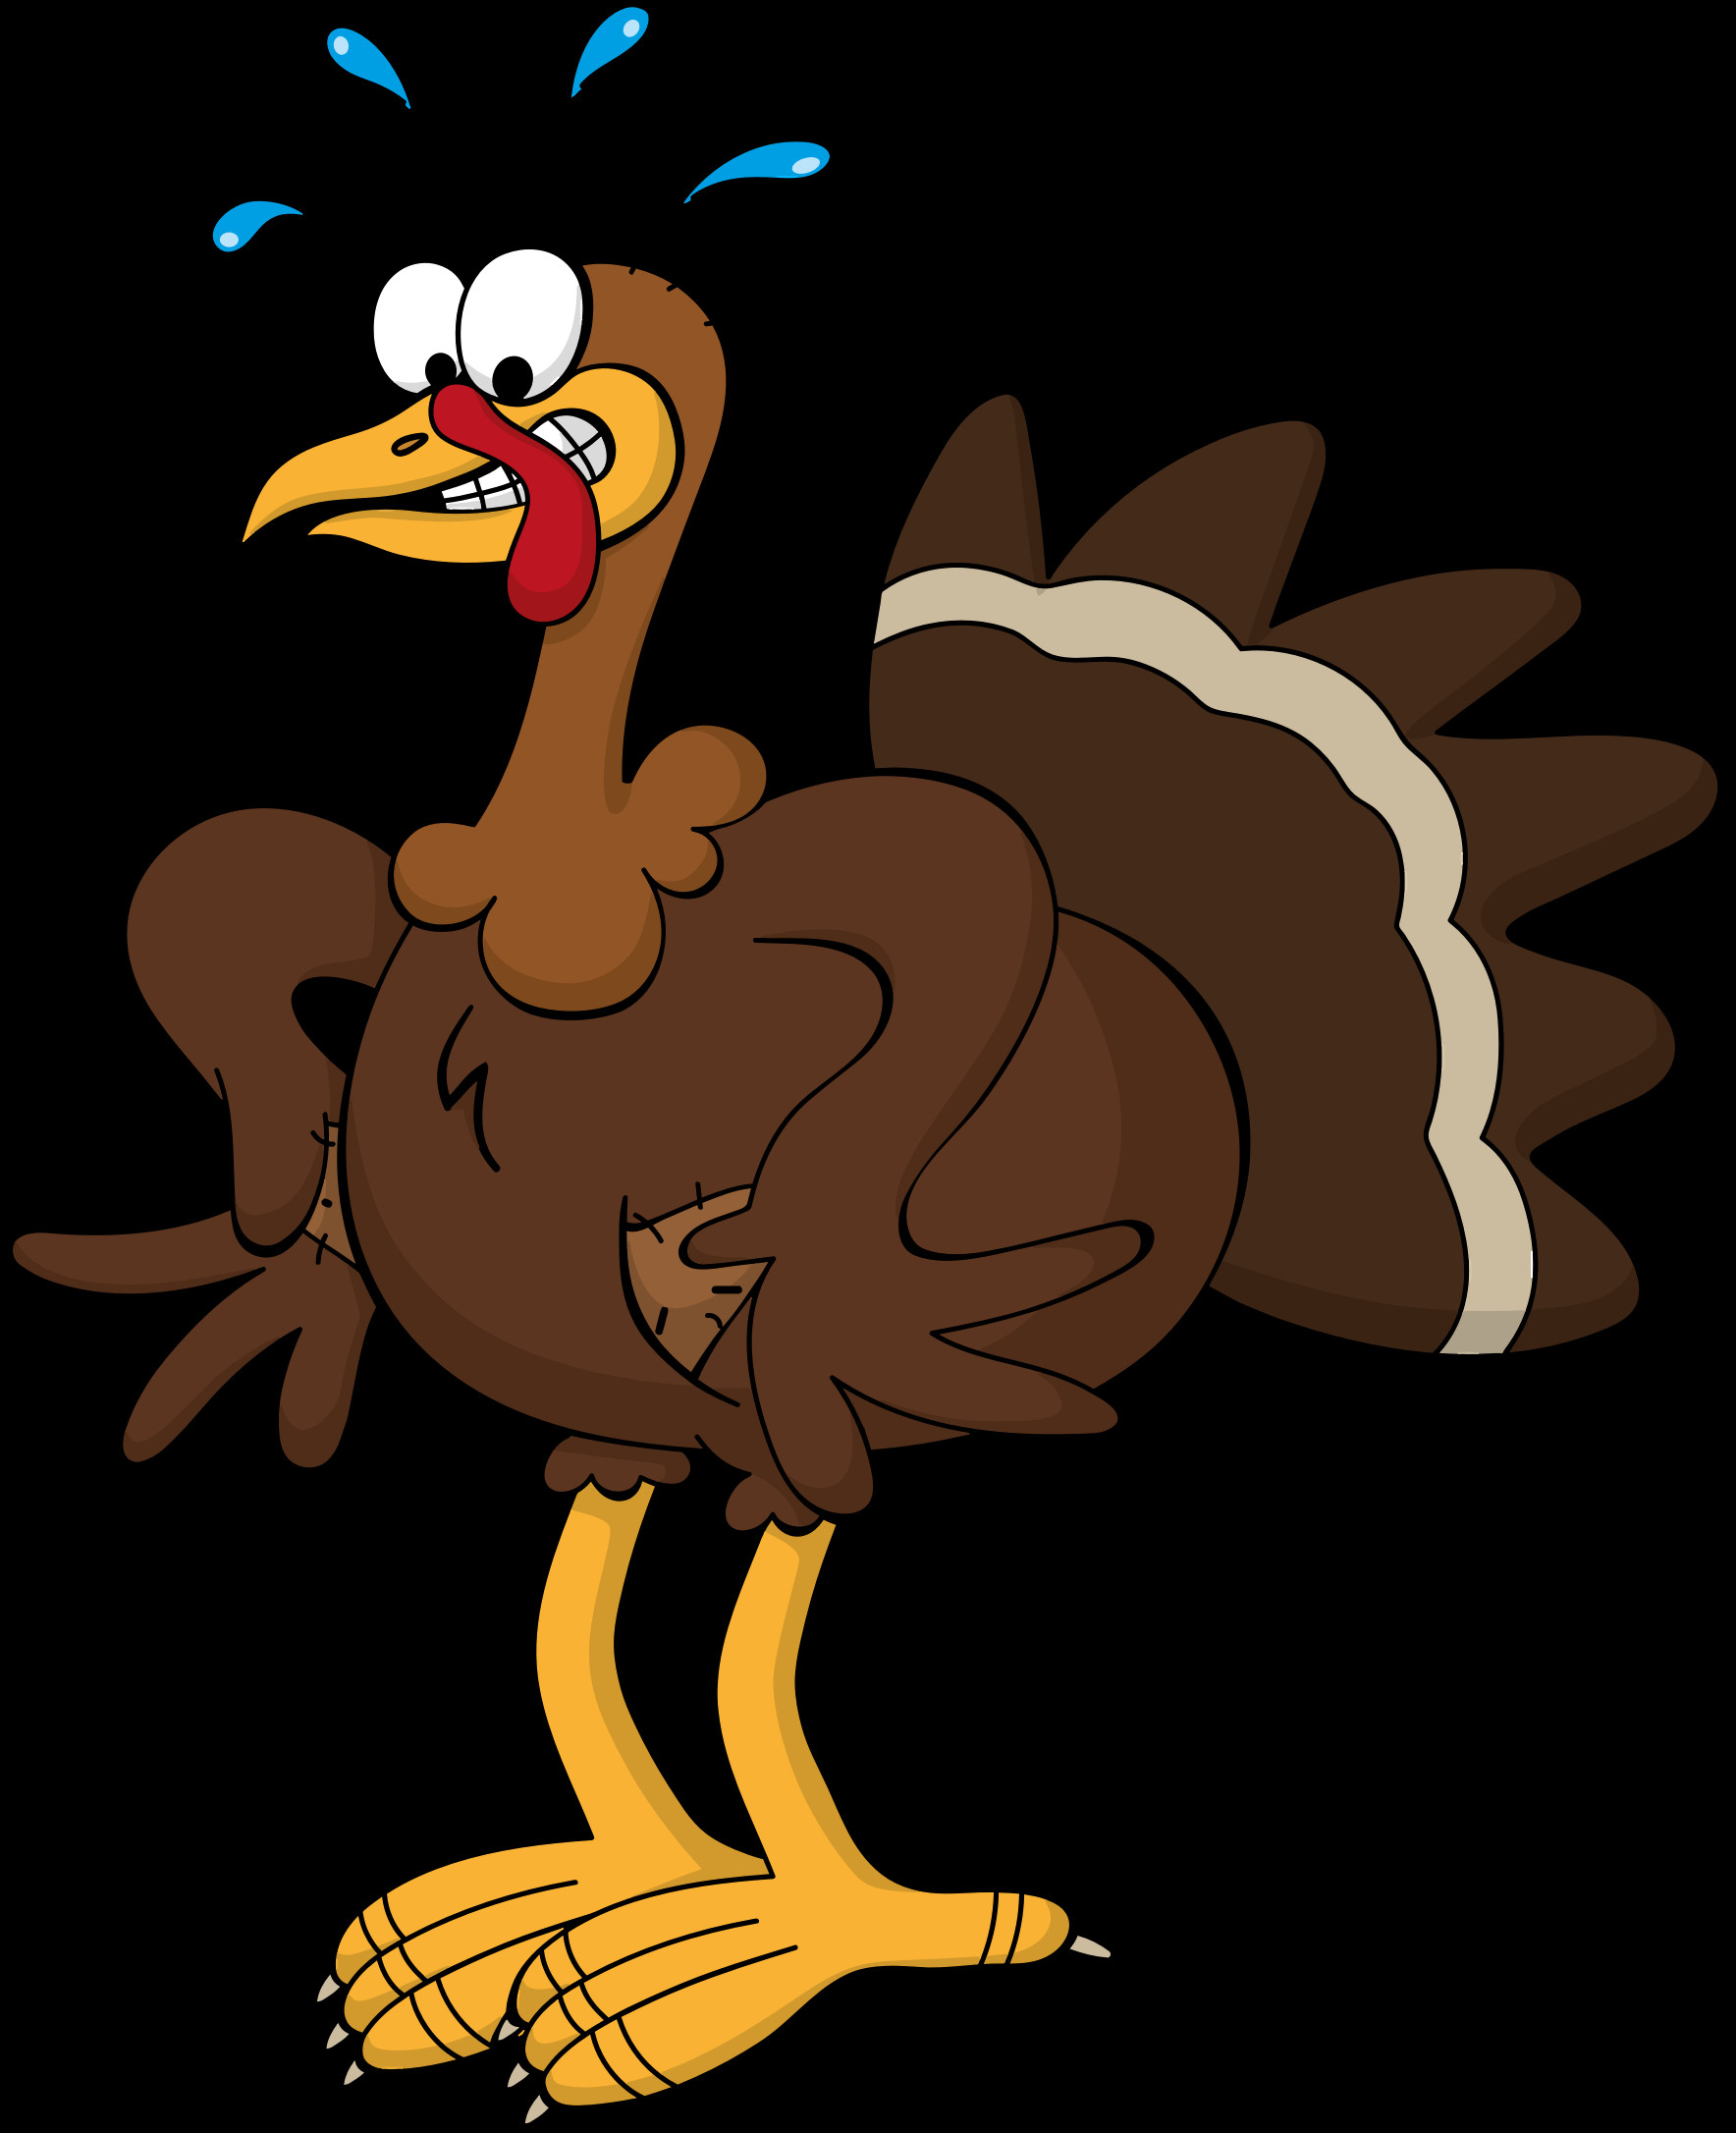 Turkey Thanksgiving Cartoon
 Turkey clipart ic Pencil and in color turkey clipart